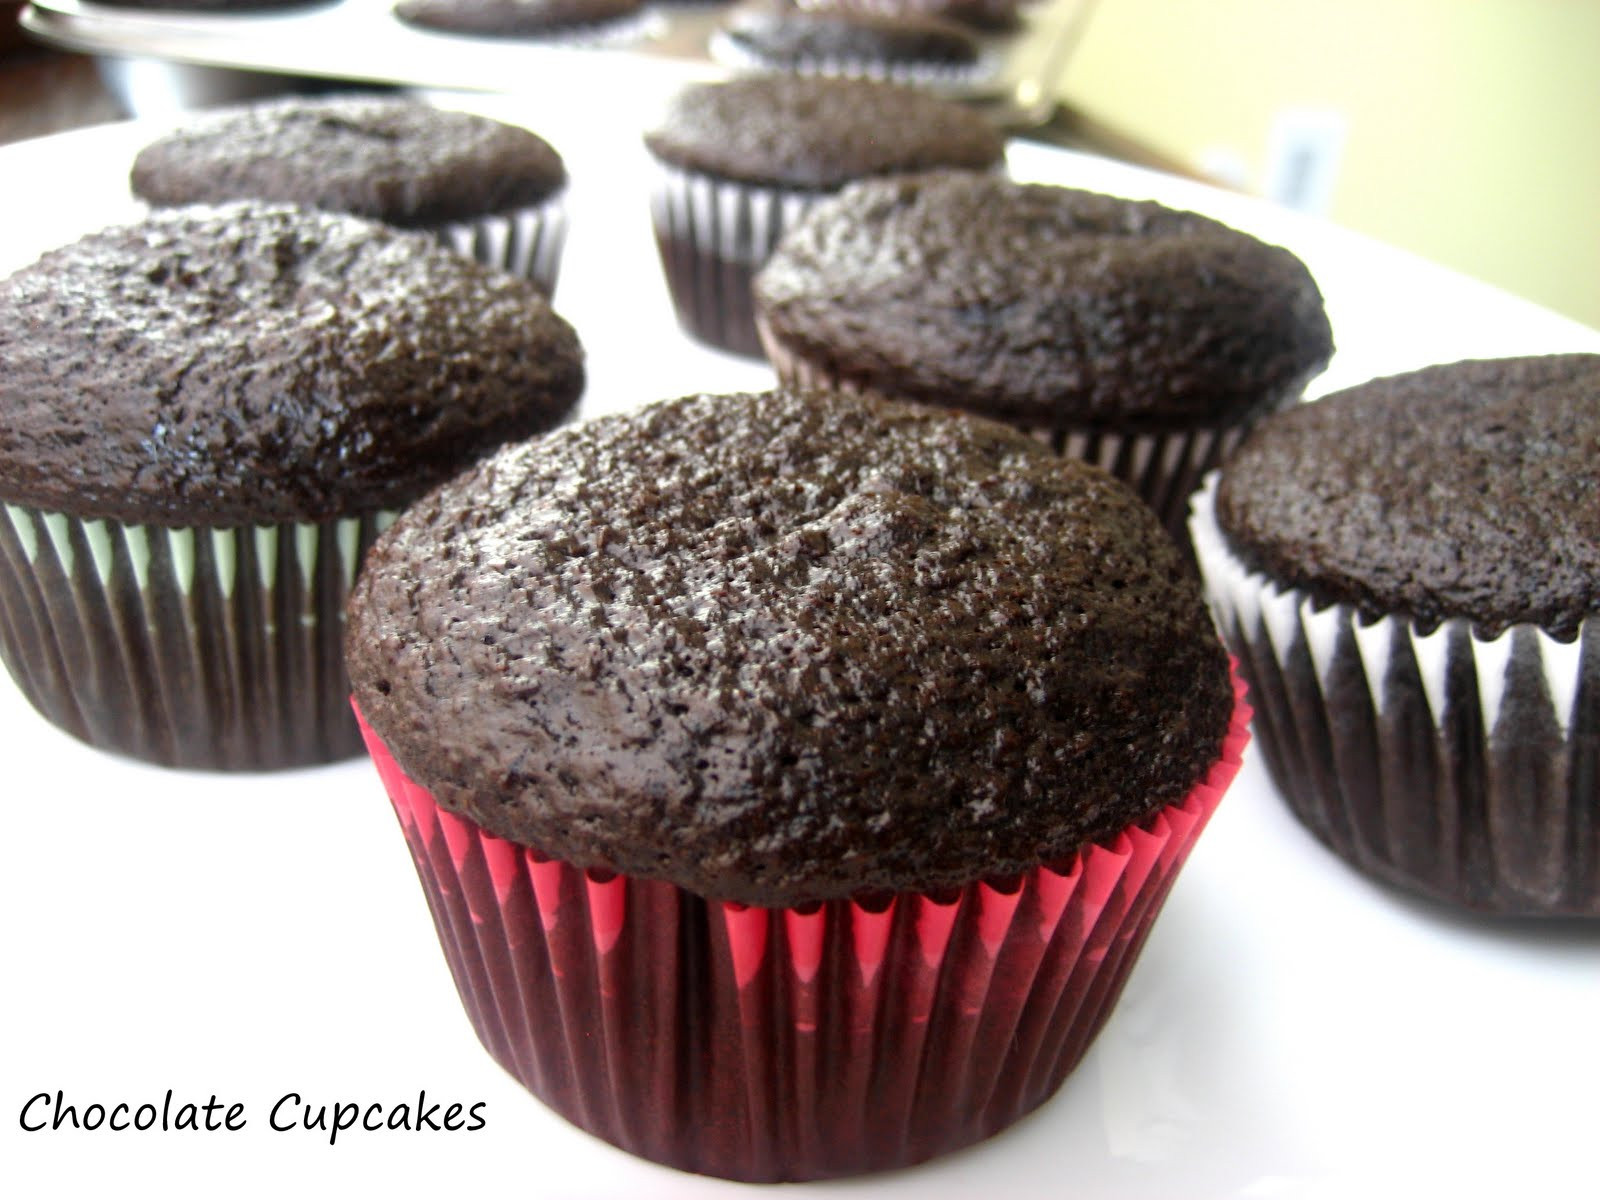 How To Make Chocolate Cupcakes Home Cooking In Montana Moist and Fluffy Chocolate